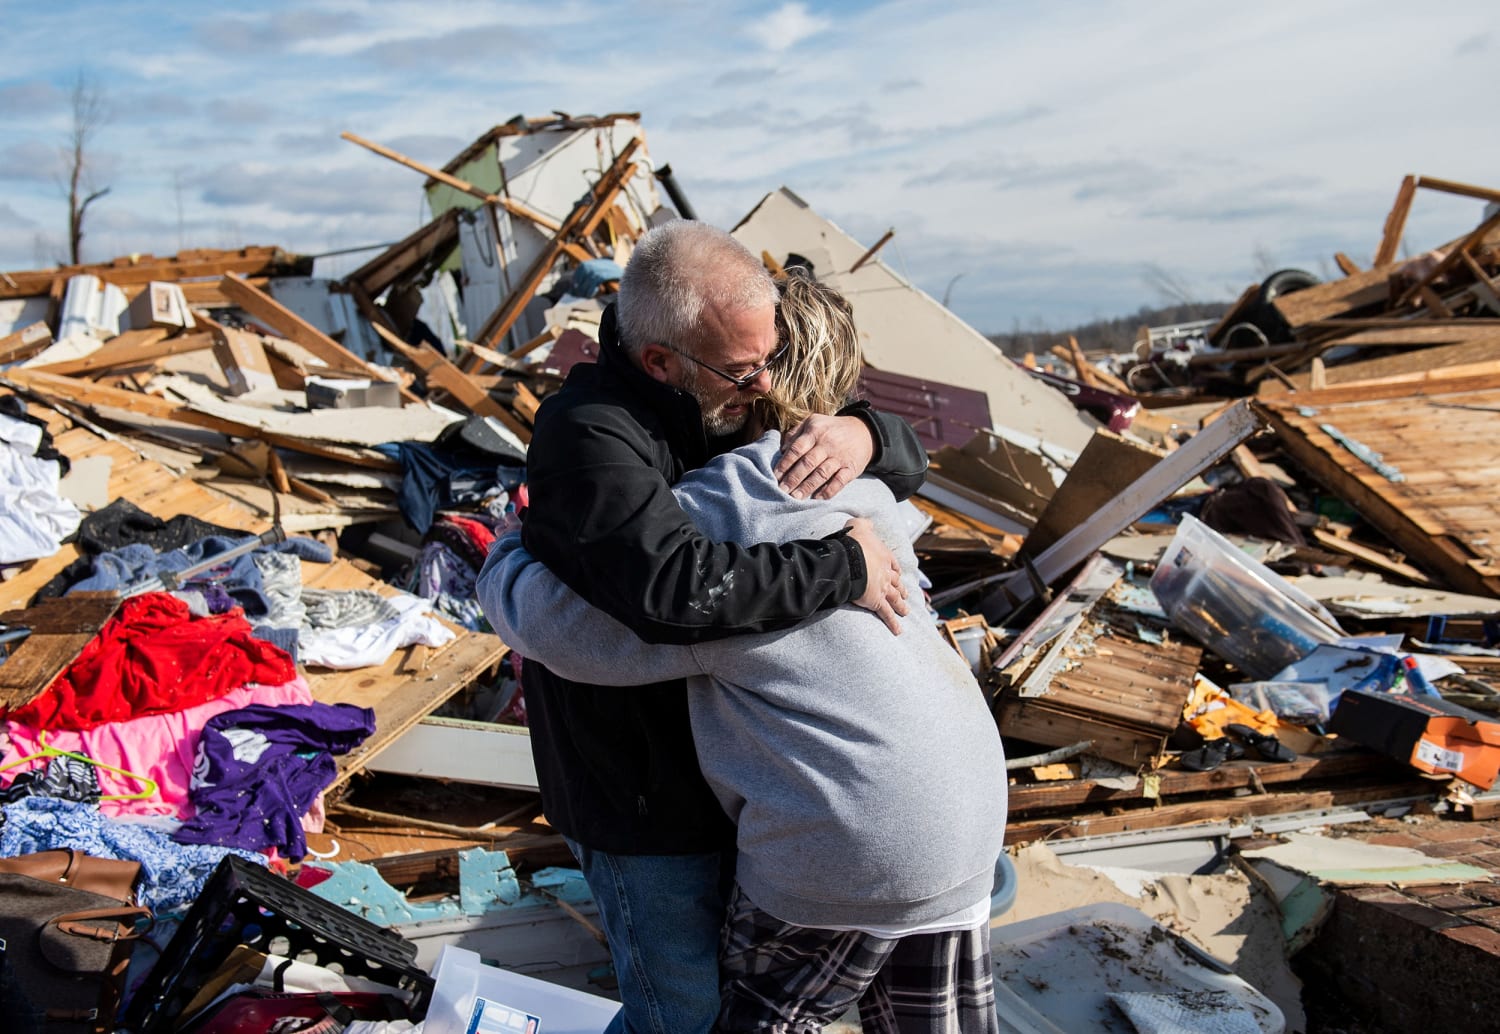 All missing accounted for in Kentucky following tornadoes, governor says